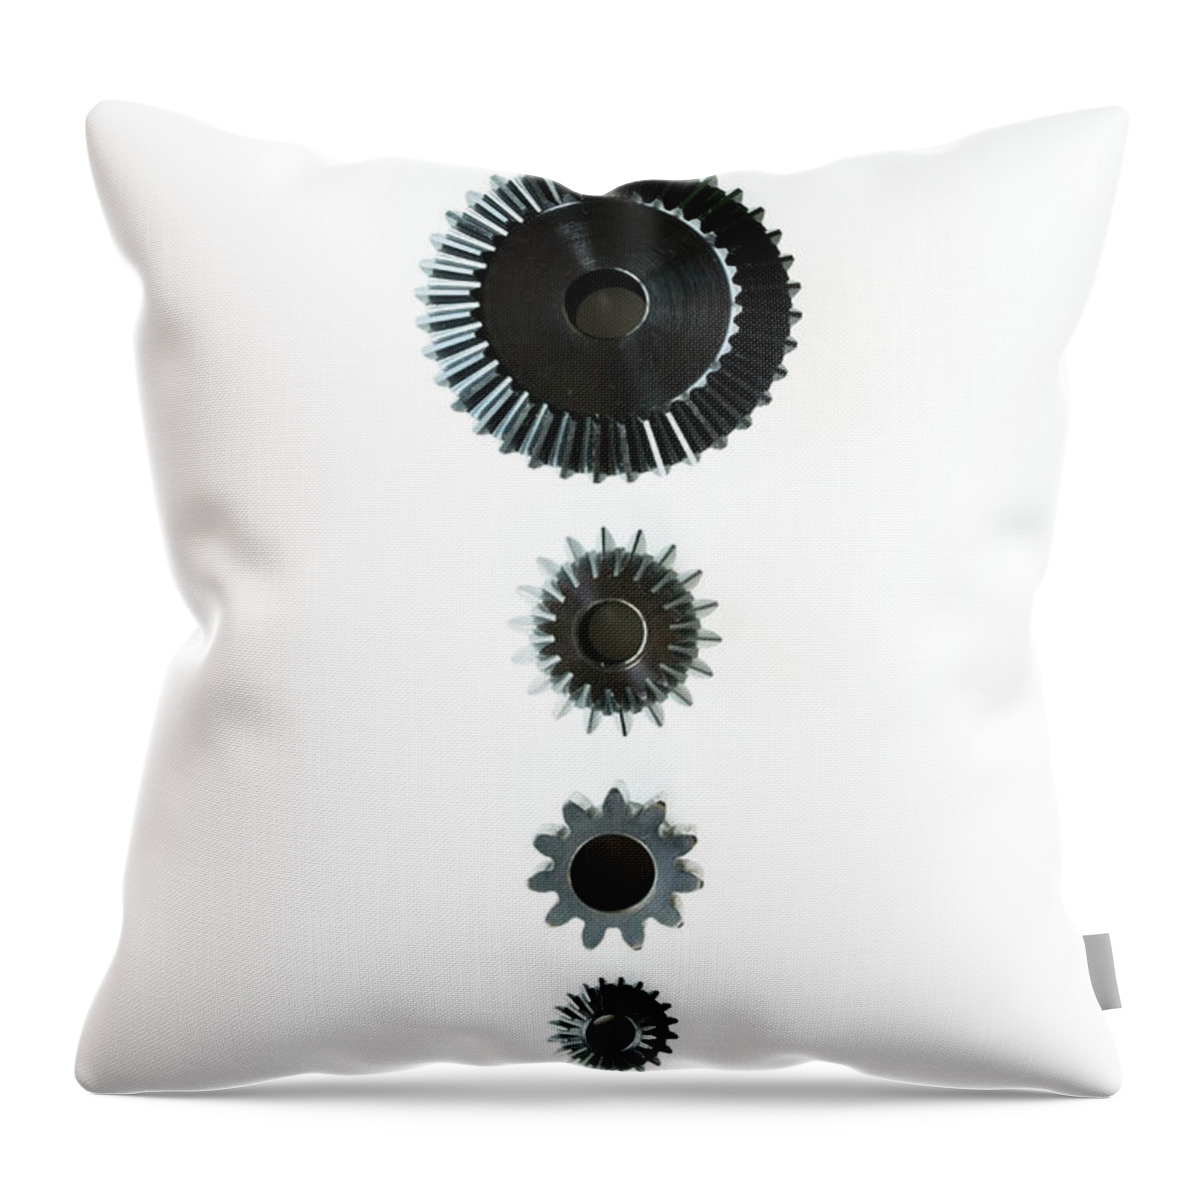 White Background Throw Pillow featuring the photograph Arrangement Of Plastic Cogs, Overhead by Erik Von Weber